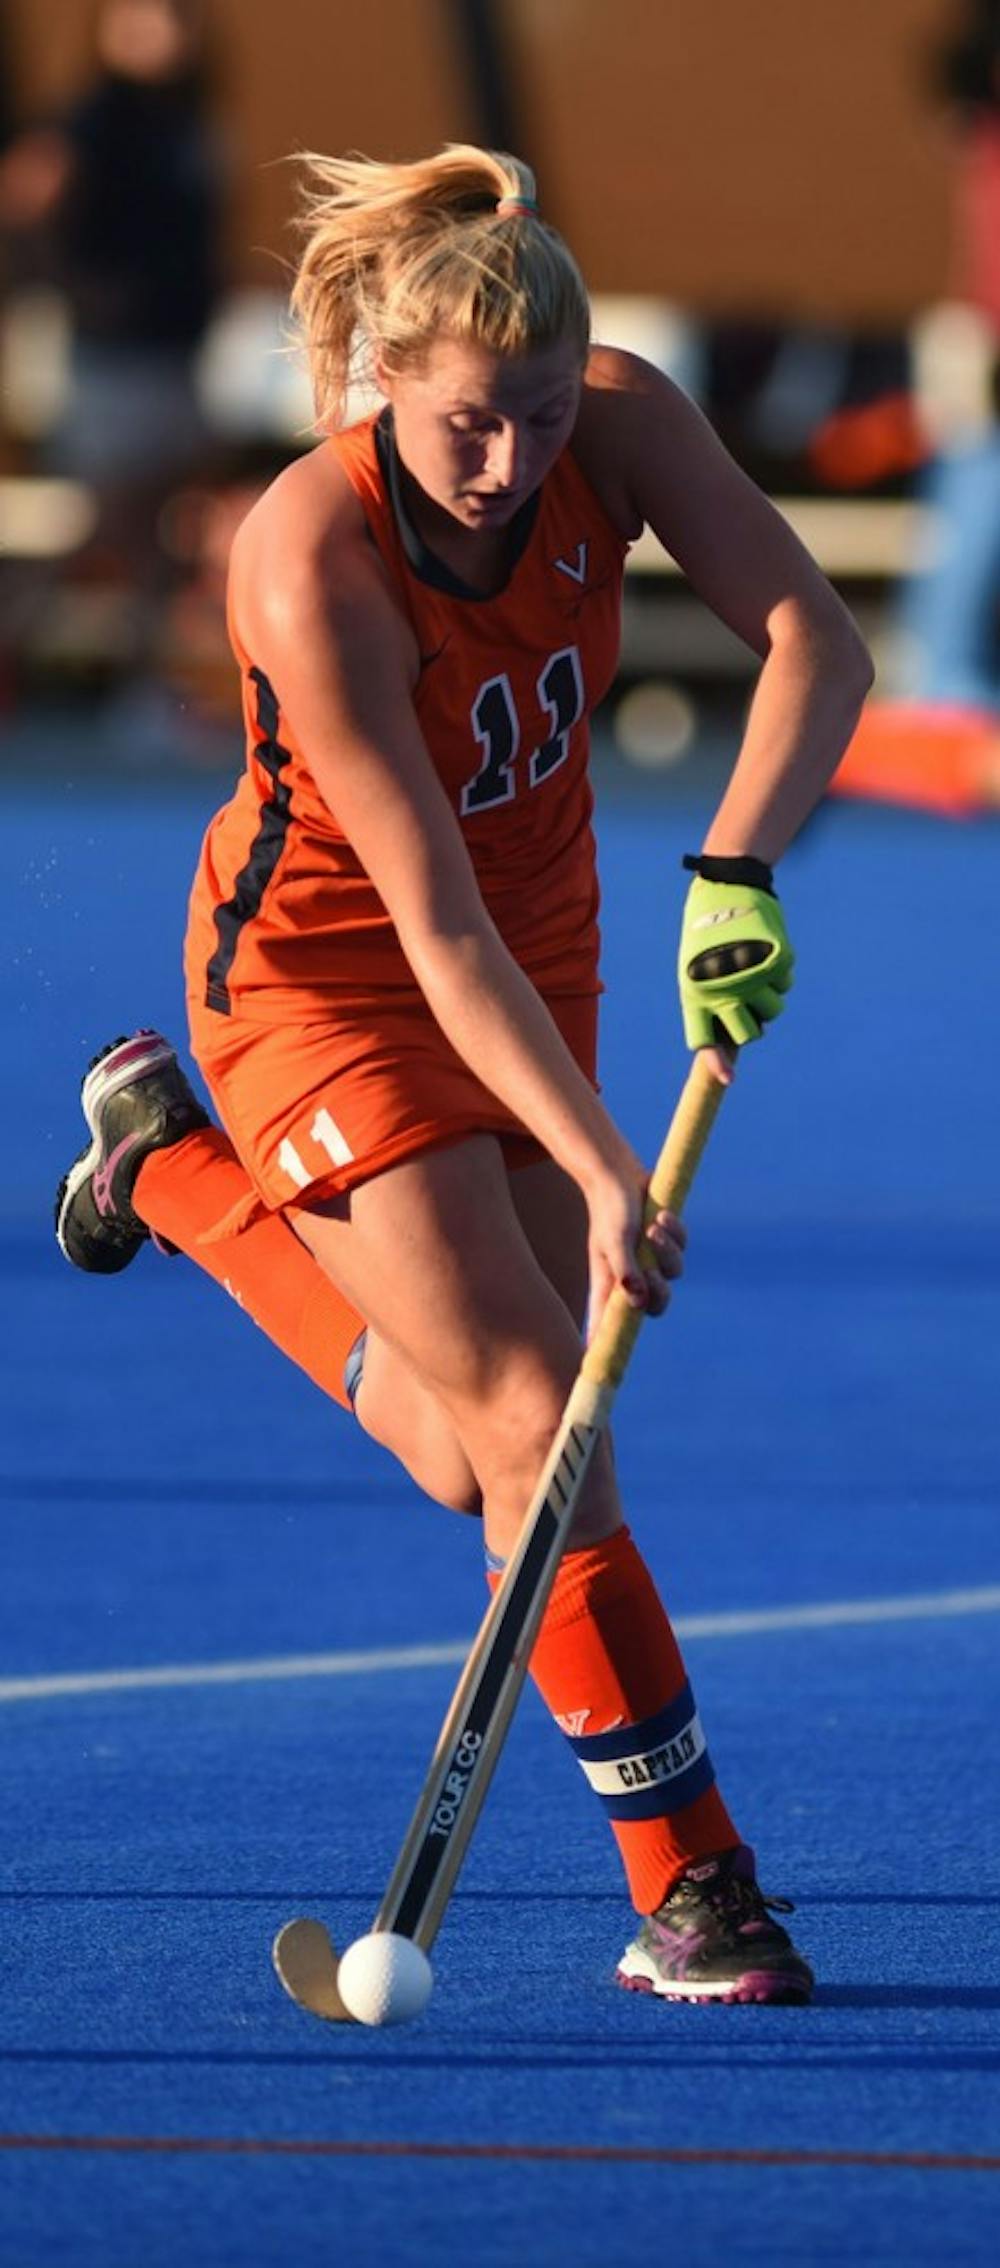 <p>Junior midfielder Lucy Hyams earned ACC Offensive Player of the Week honors after handing out two assists and scoring a goal in the Cavaliers' 4-2 win against No. 6 Duke. </p>